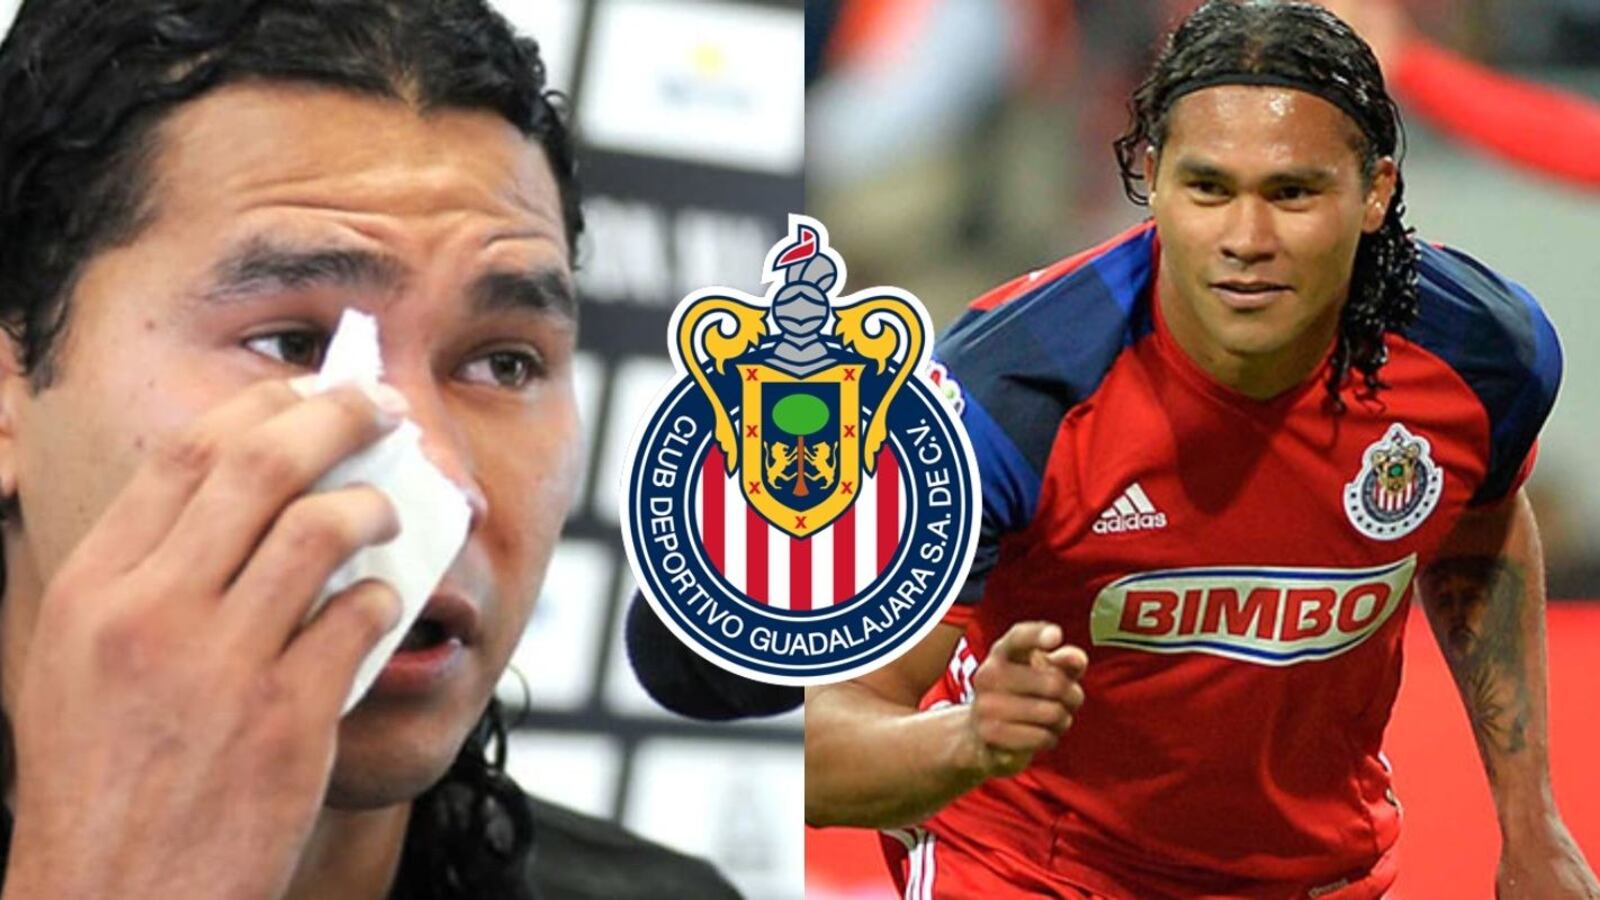 While he cried upon his arrival at Chivas, what Gullit Peña did with Al Dhaid